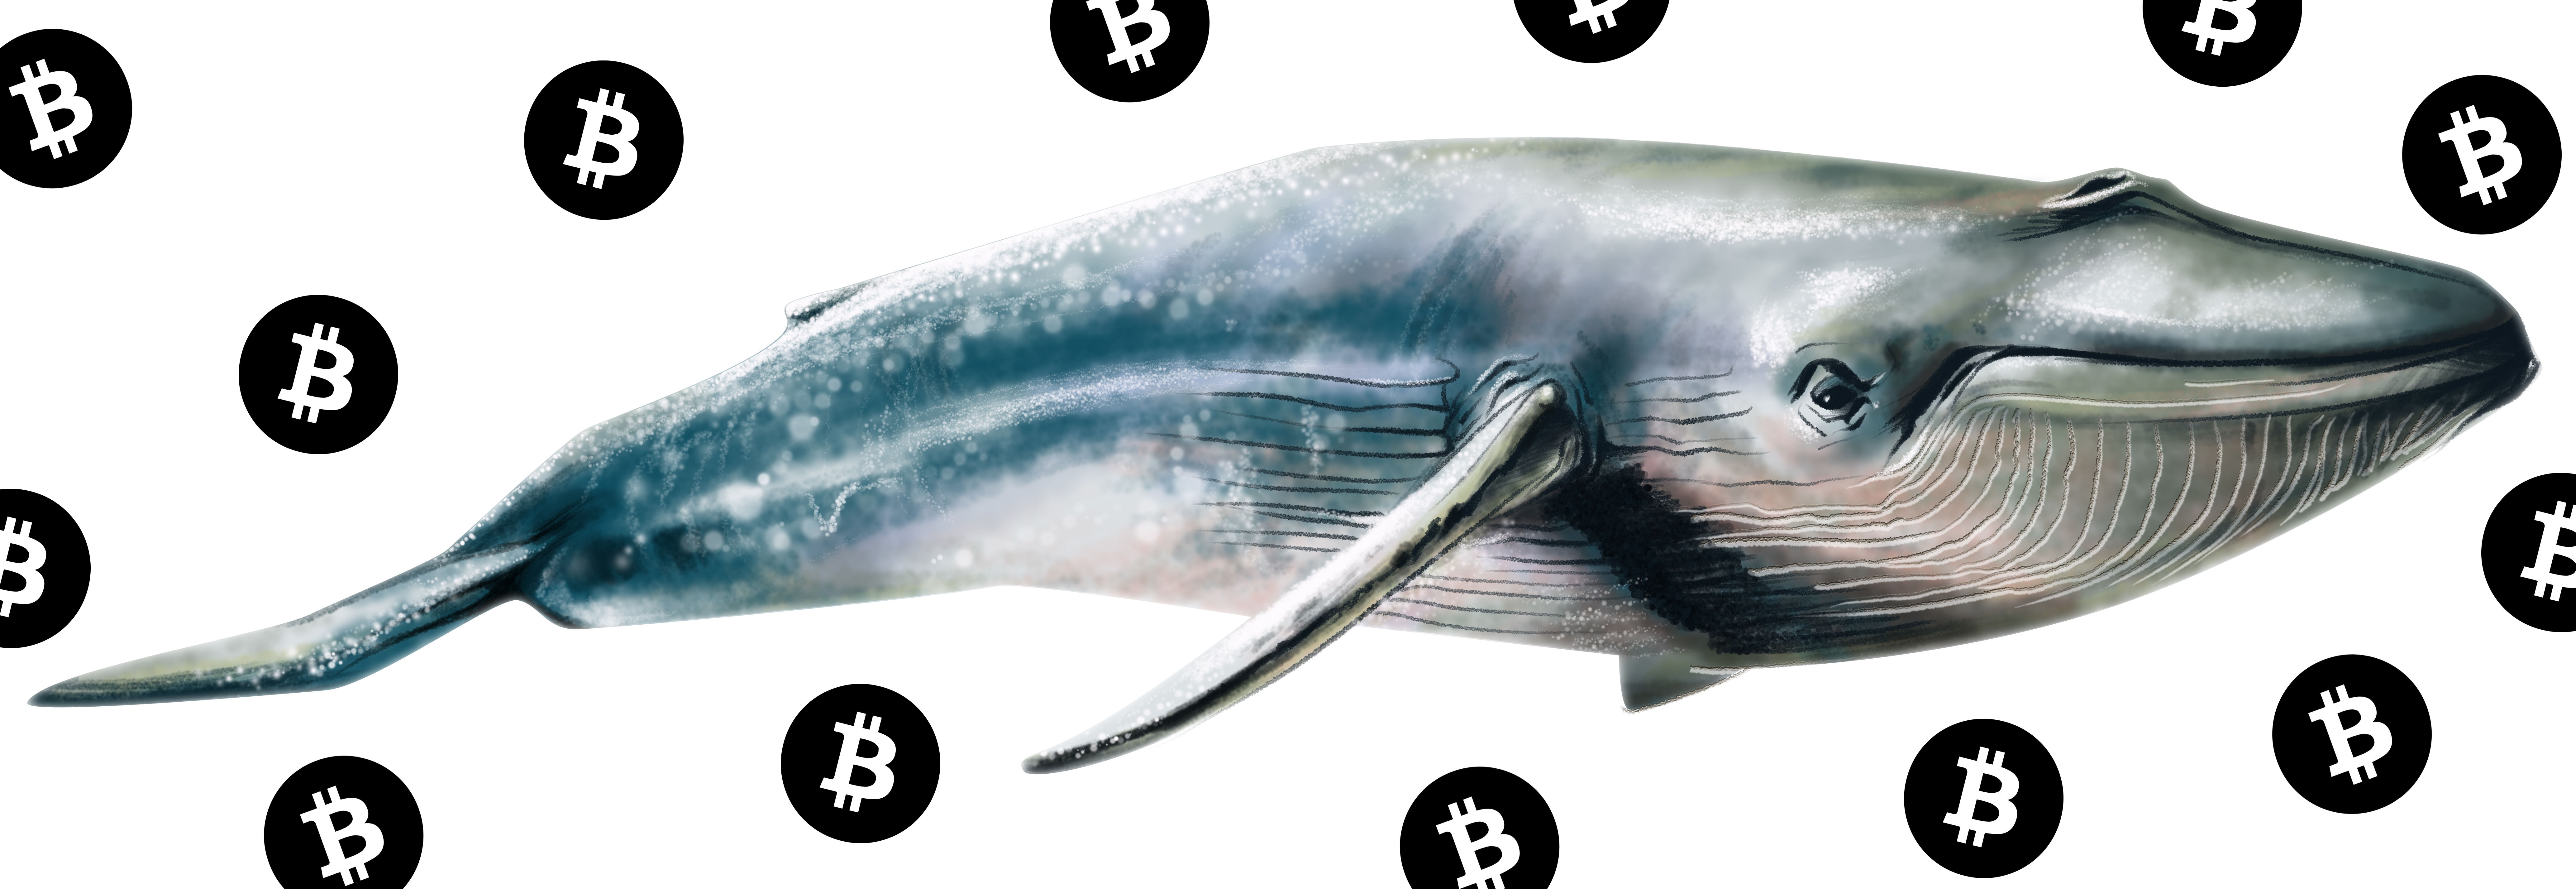 Previously Inactive Whales Are Moving Large Amounts of BTC